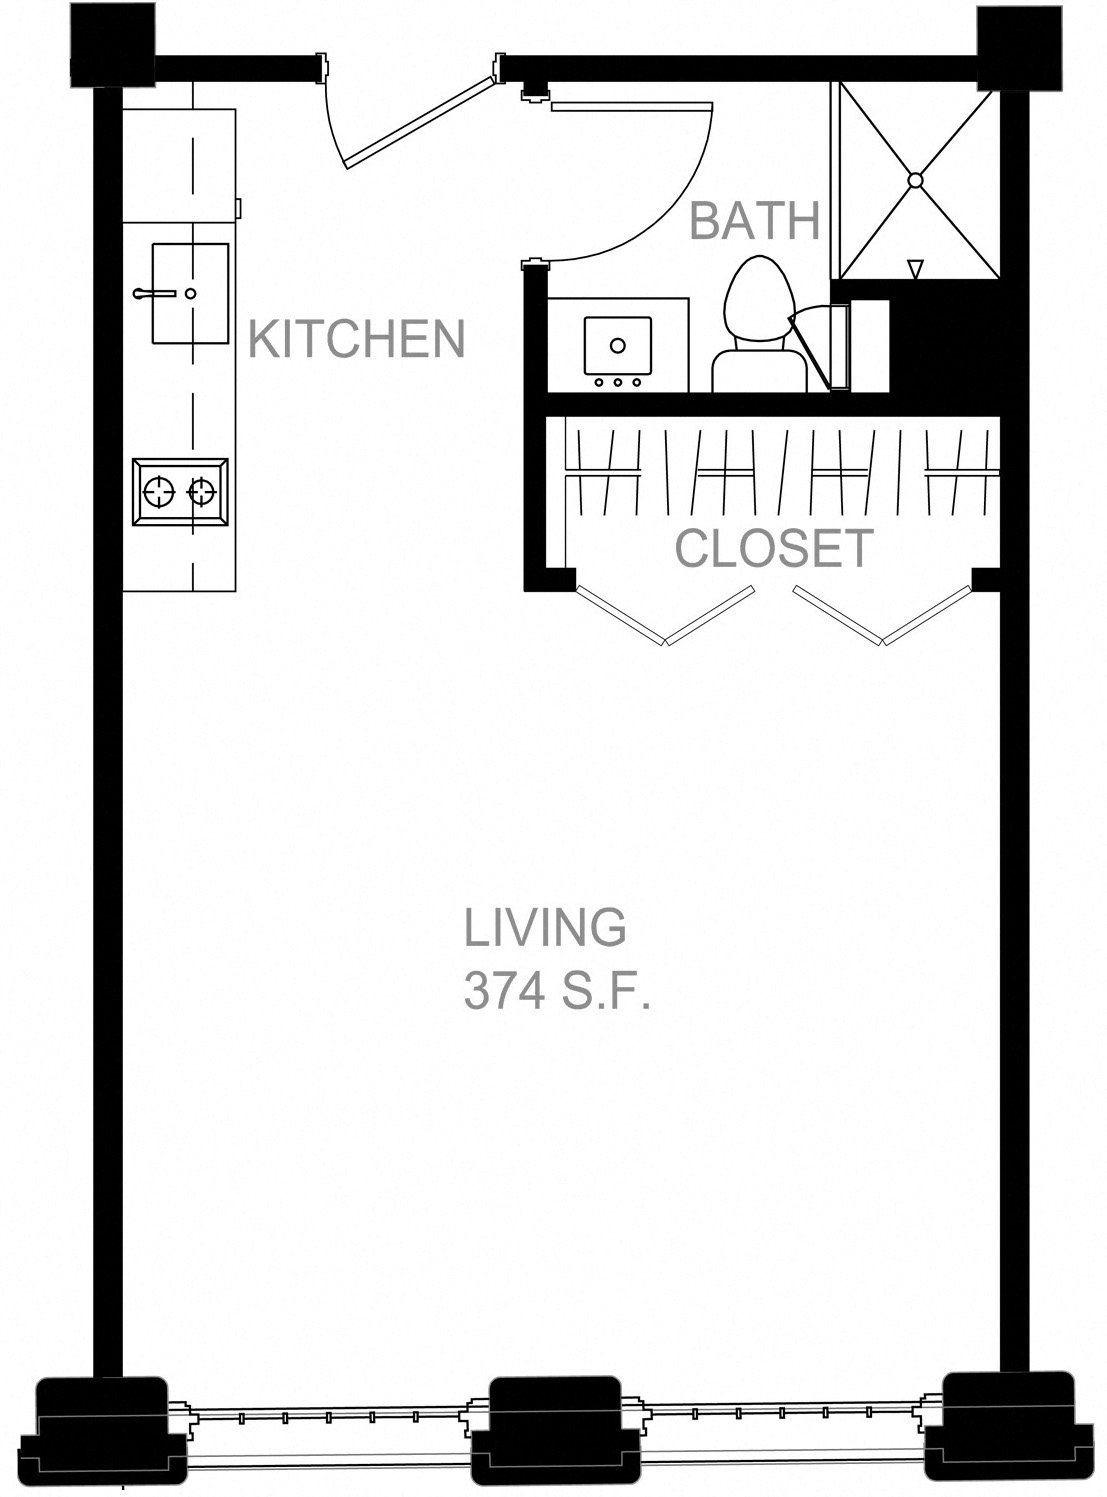 Floorplan for Apartment #S2529, 0 bedroom unit at Halstead Providence